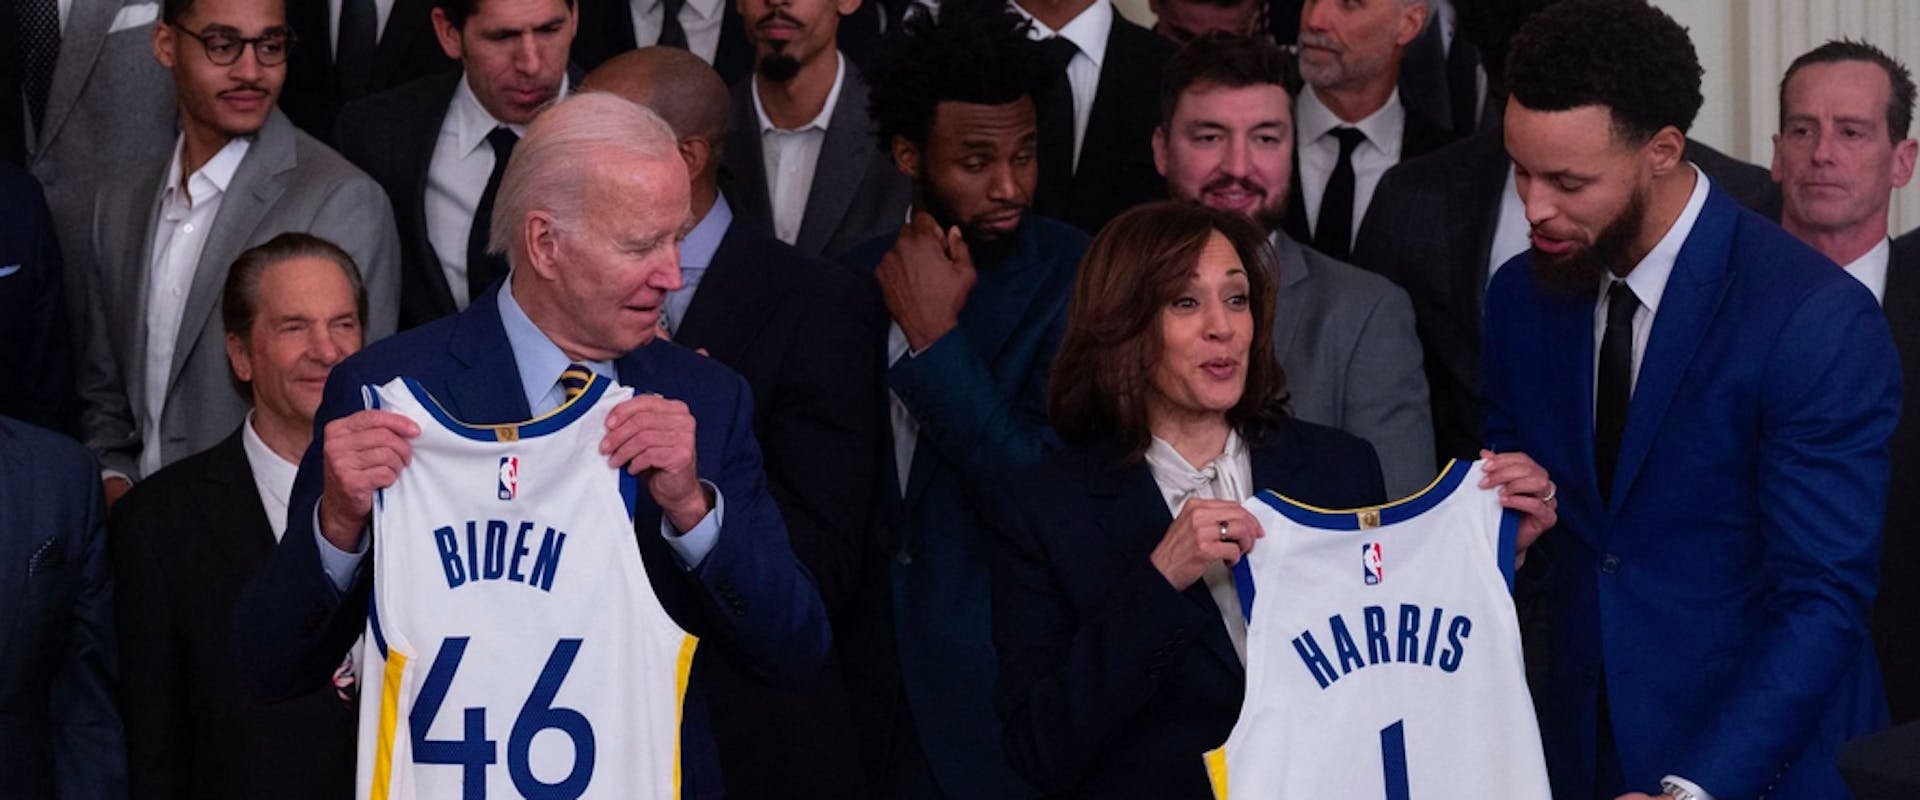 US President Joe Biden and US Vice President Kamala Harris are presented with jerseys from members of the Golden State Warriors basketball team during a celebration for their 2022 NBA championship, in the East Room of the White House in Washington, DC, on January 17, 2023. 